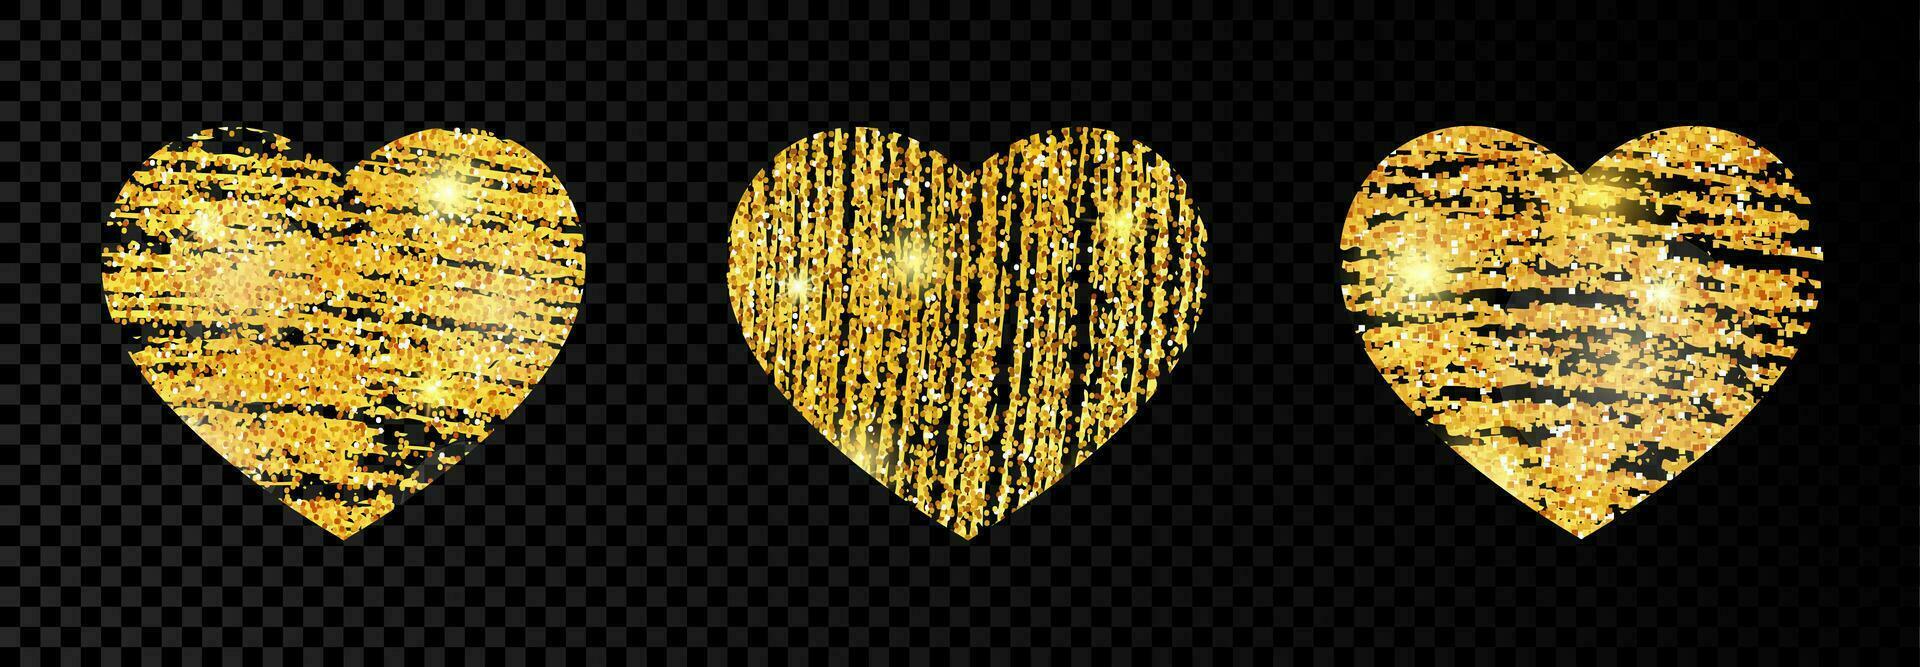 Set of three heart with golden glittering scribble paint on dark background. Background with gold sparkles and glitter effect. Empty space for your text. Vector illustration